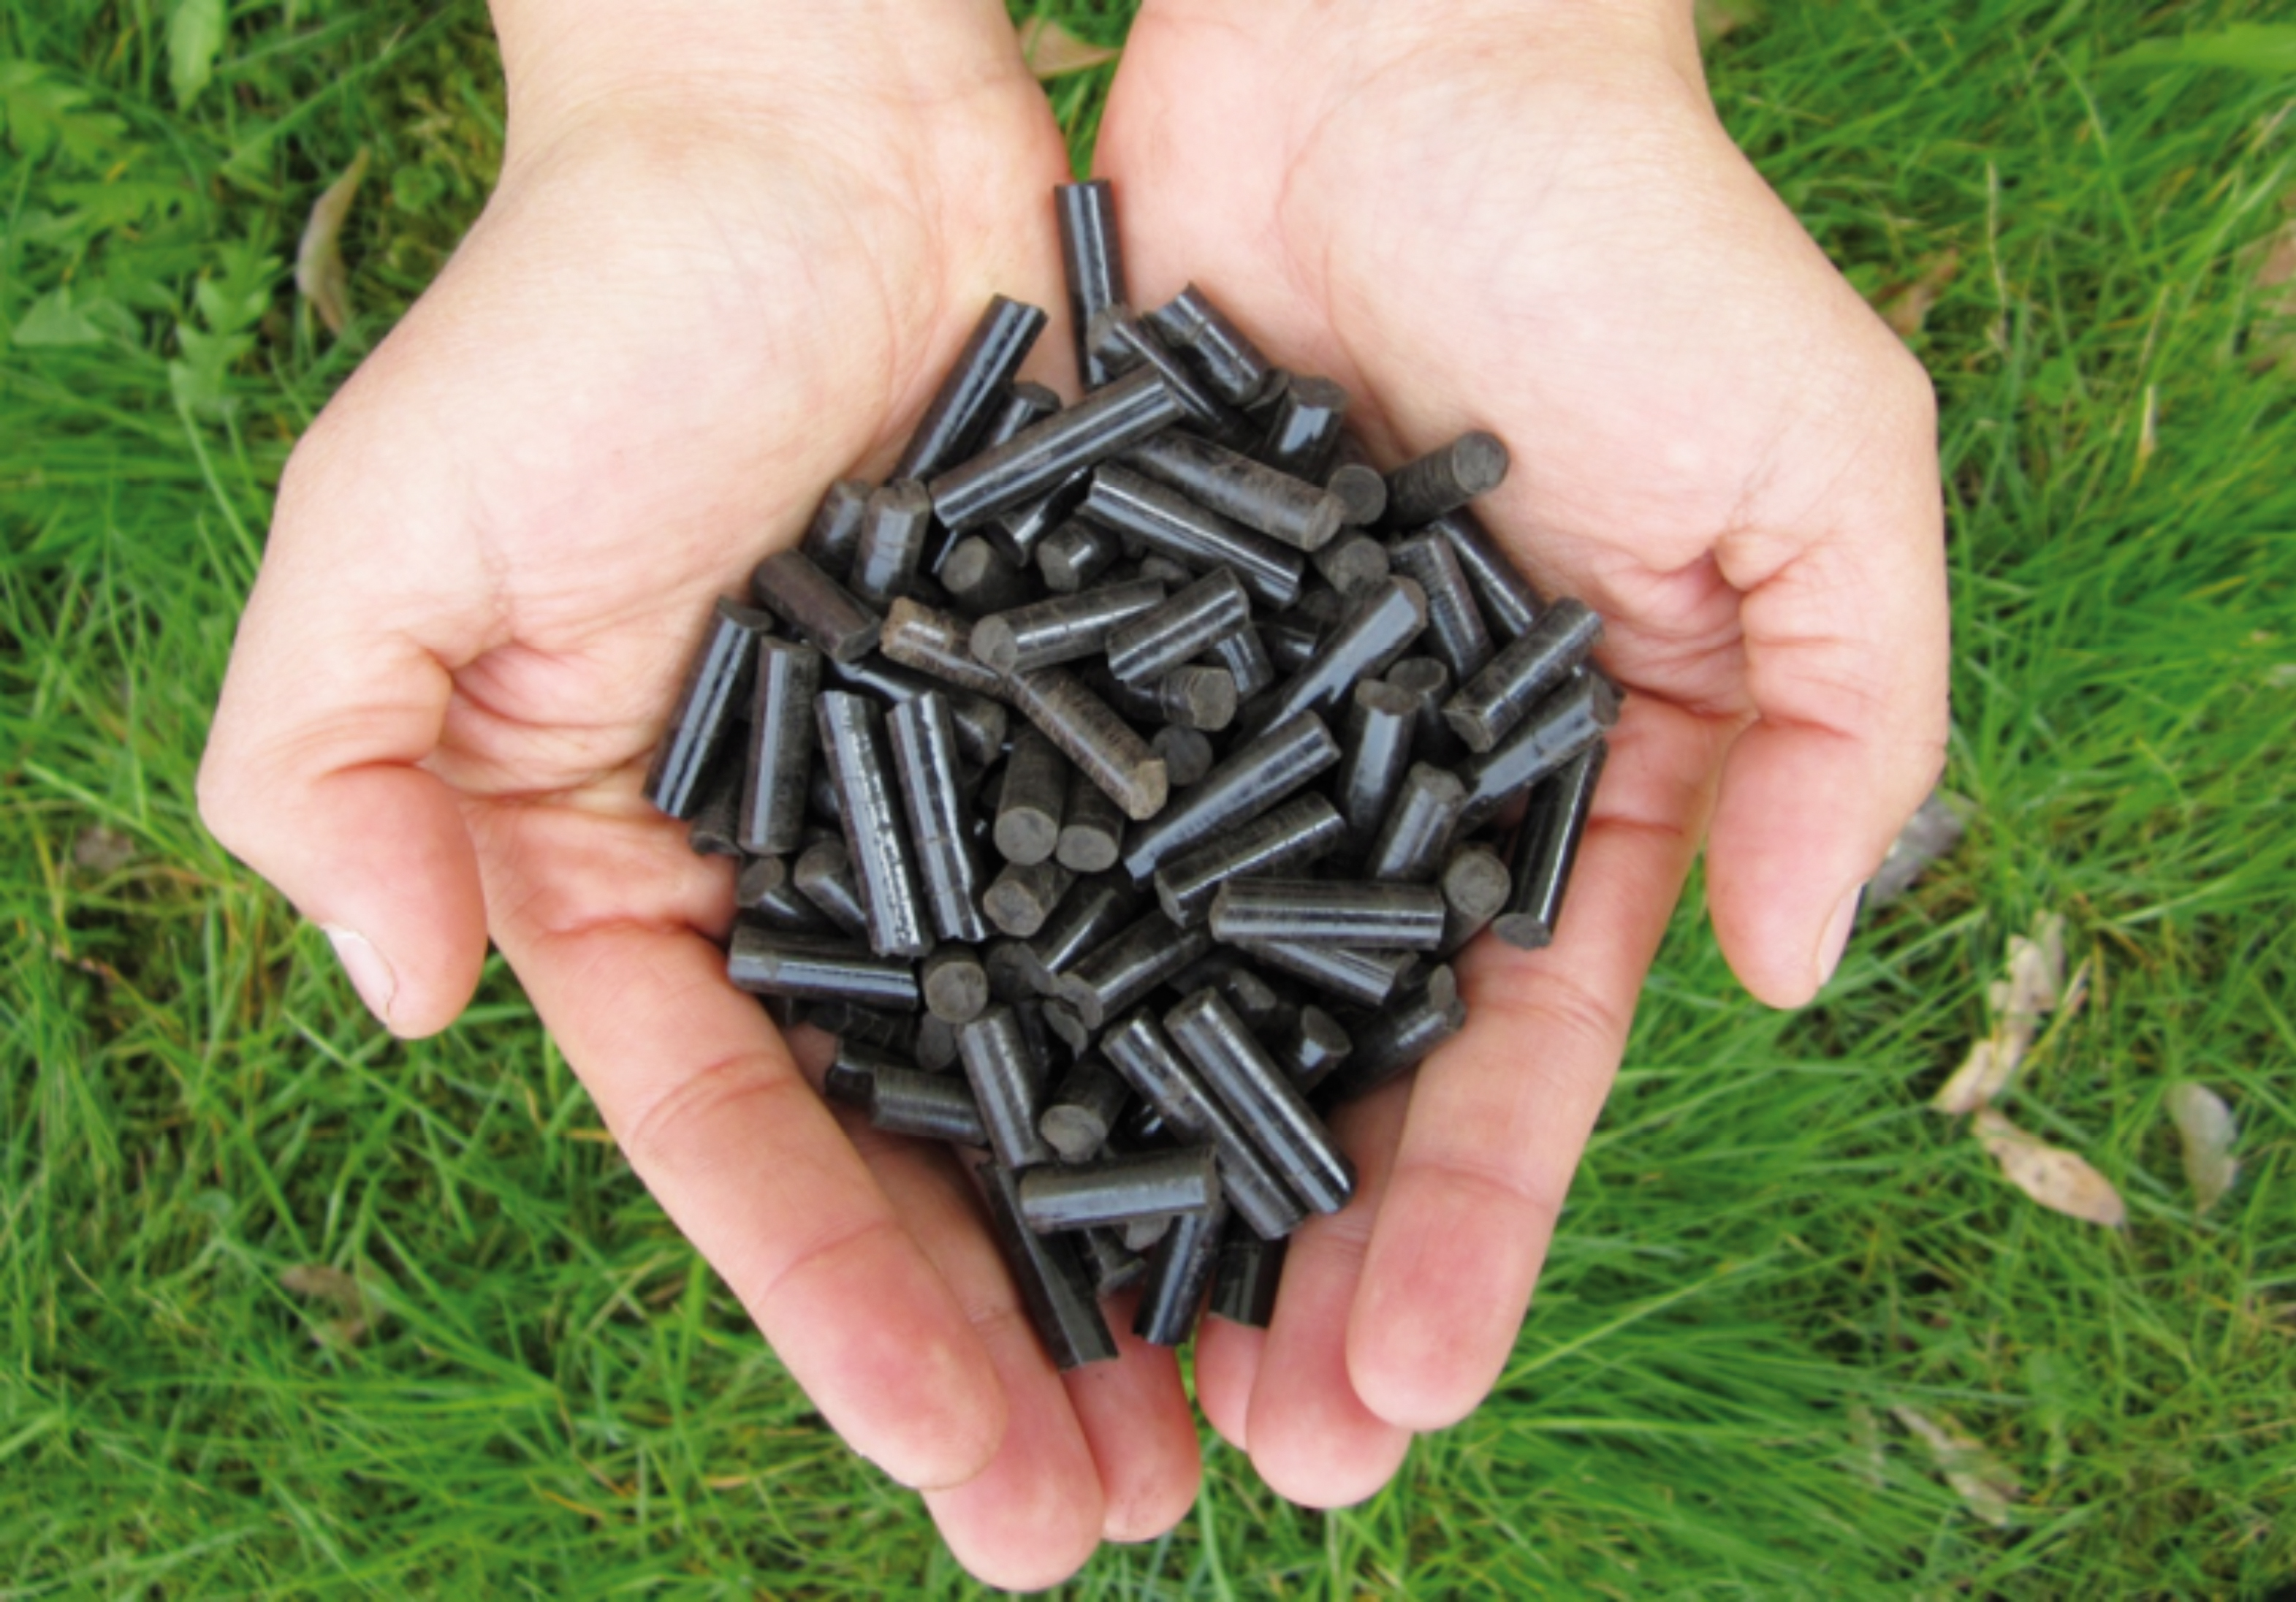 The photo shows two hands full of fertiliser pellets. The EU-project PhosFarm is focussed on finding ways to produce such pellets from agricultural waste.